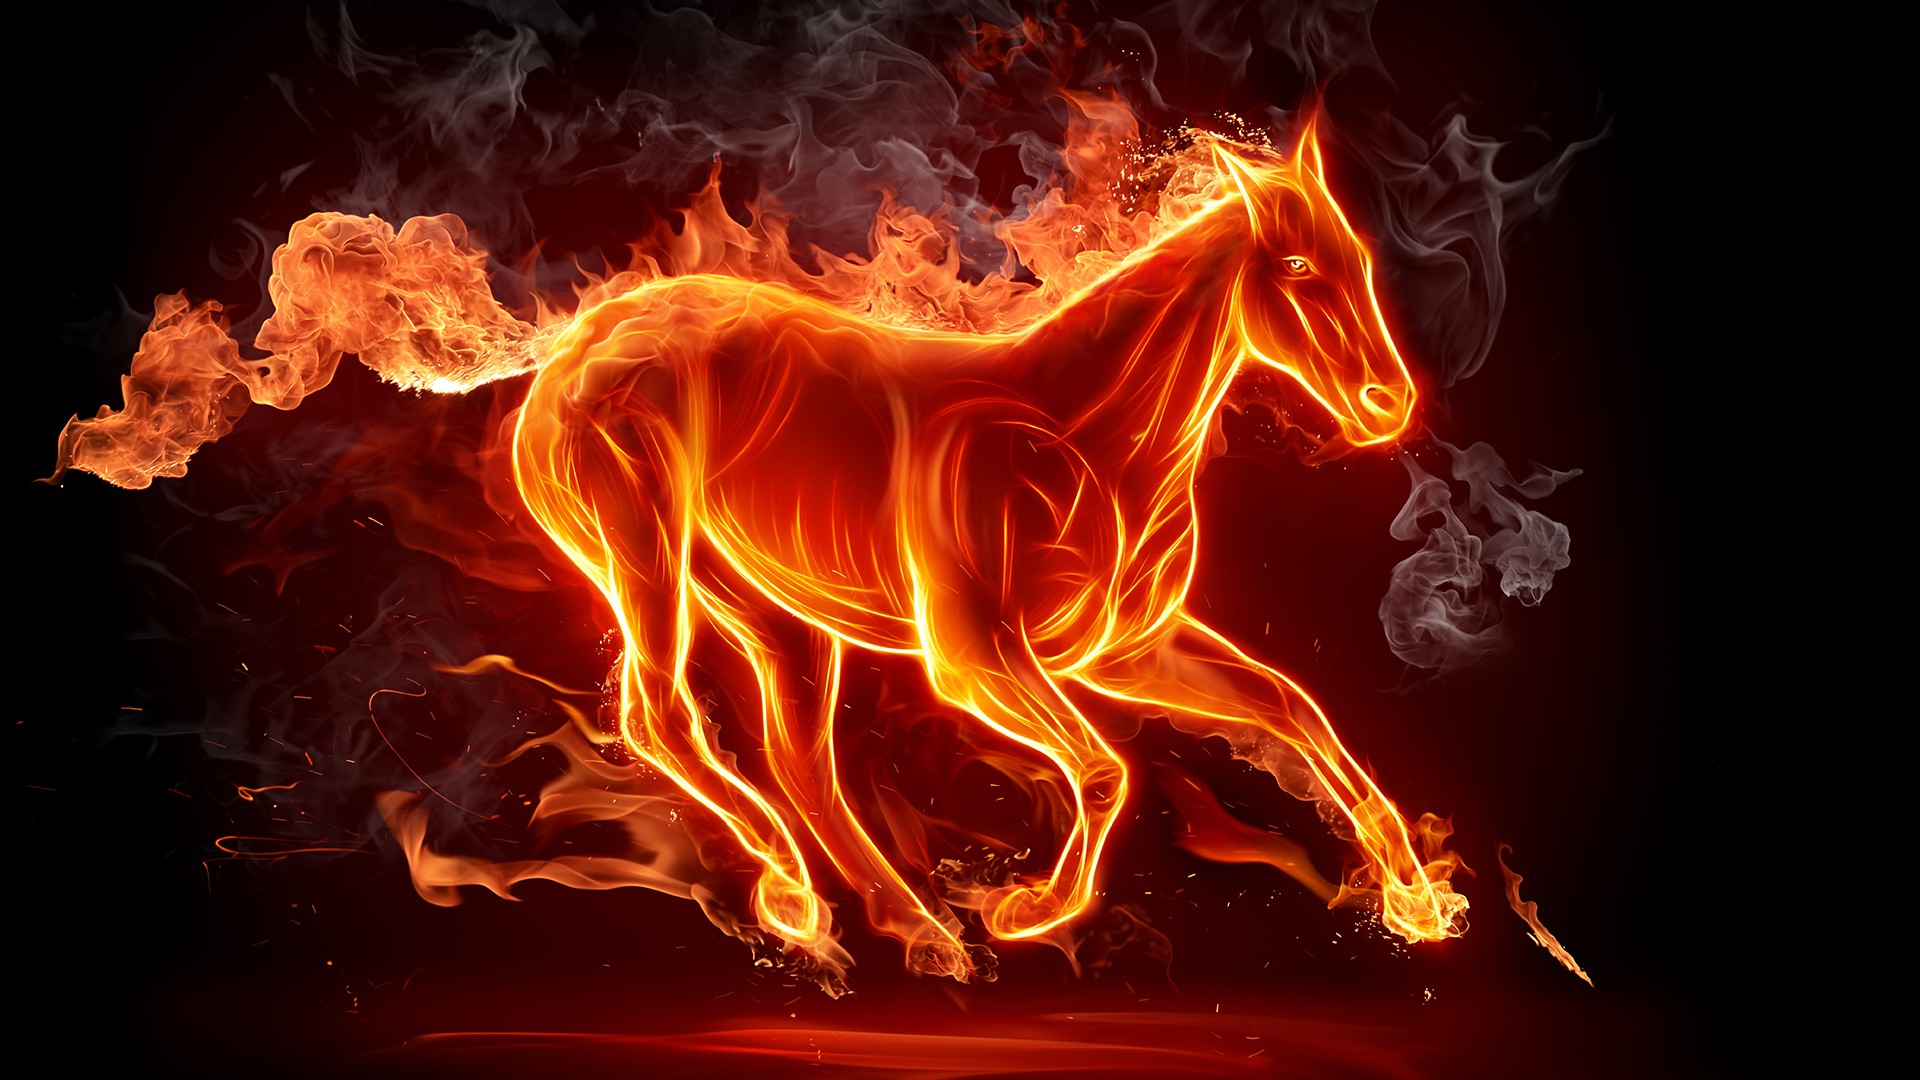 Abstract Artistic Elemental Fire Horse Smoke 1920x1080